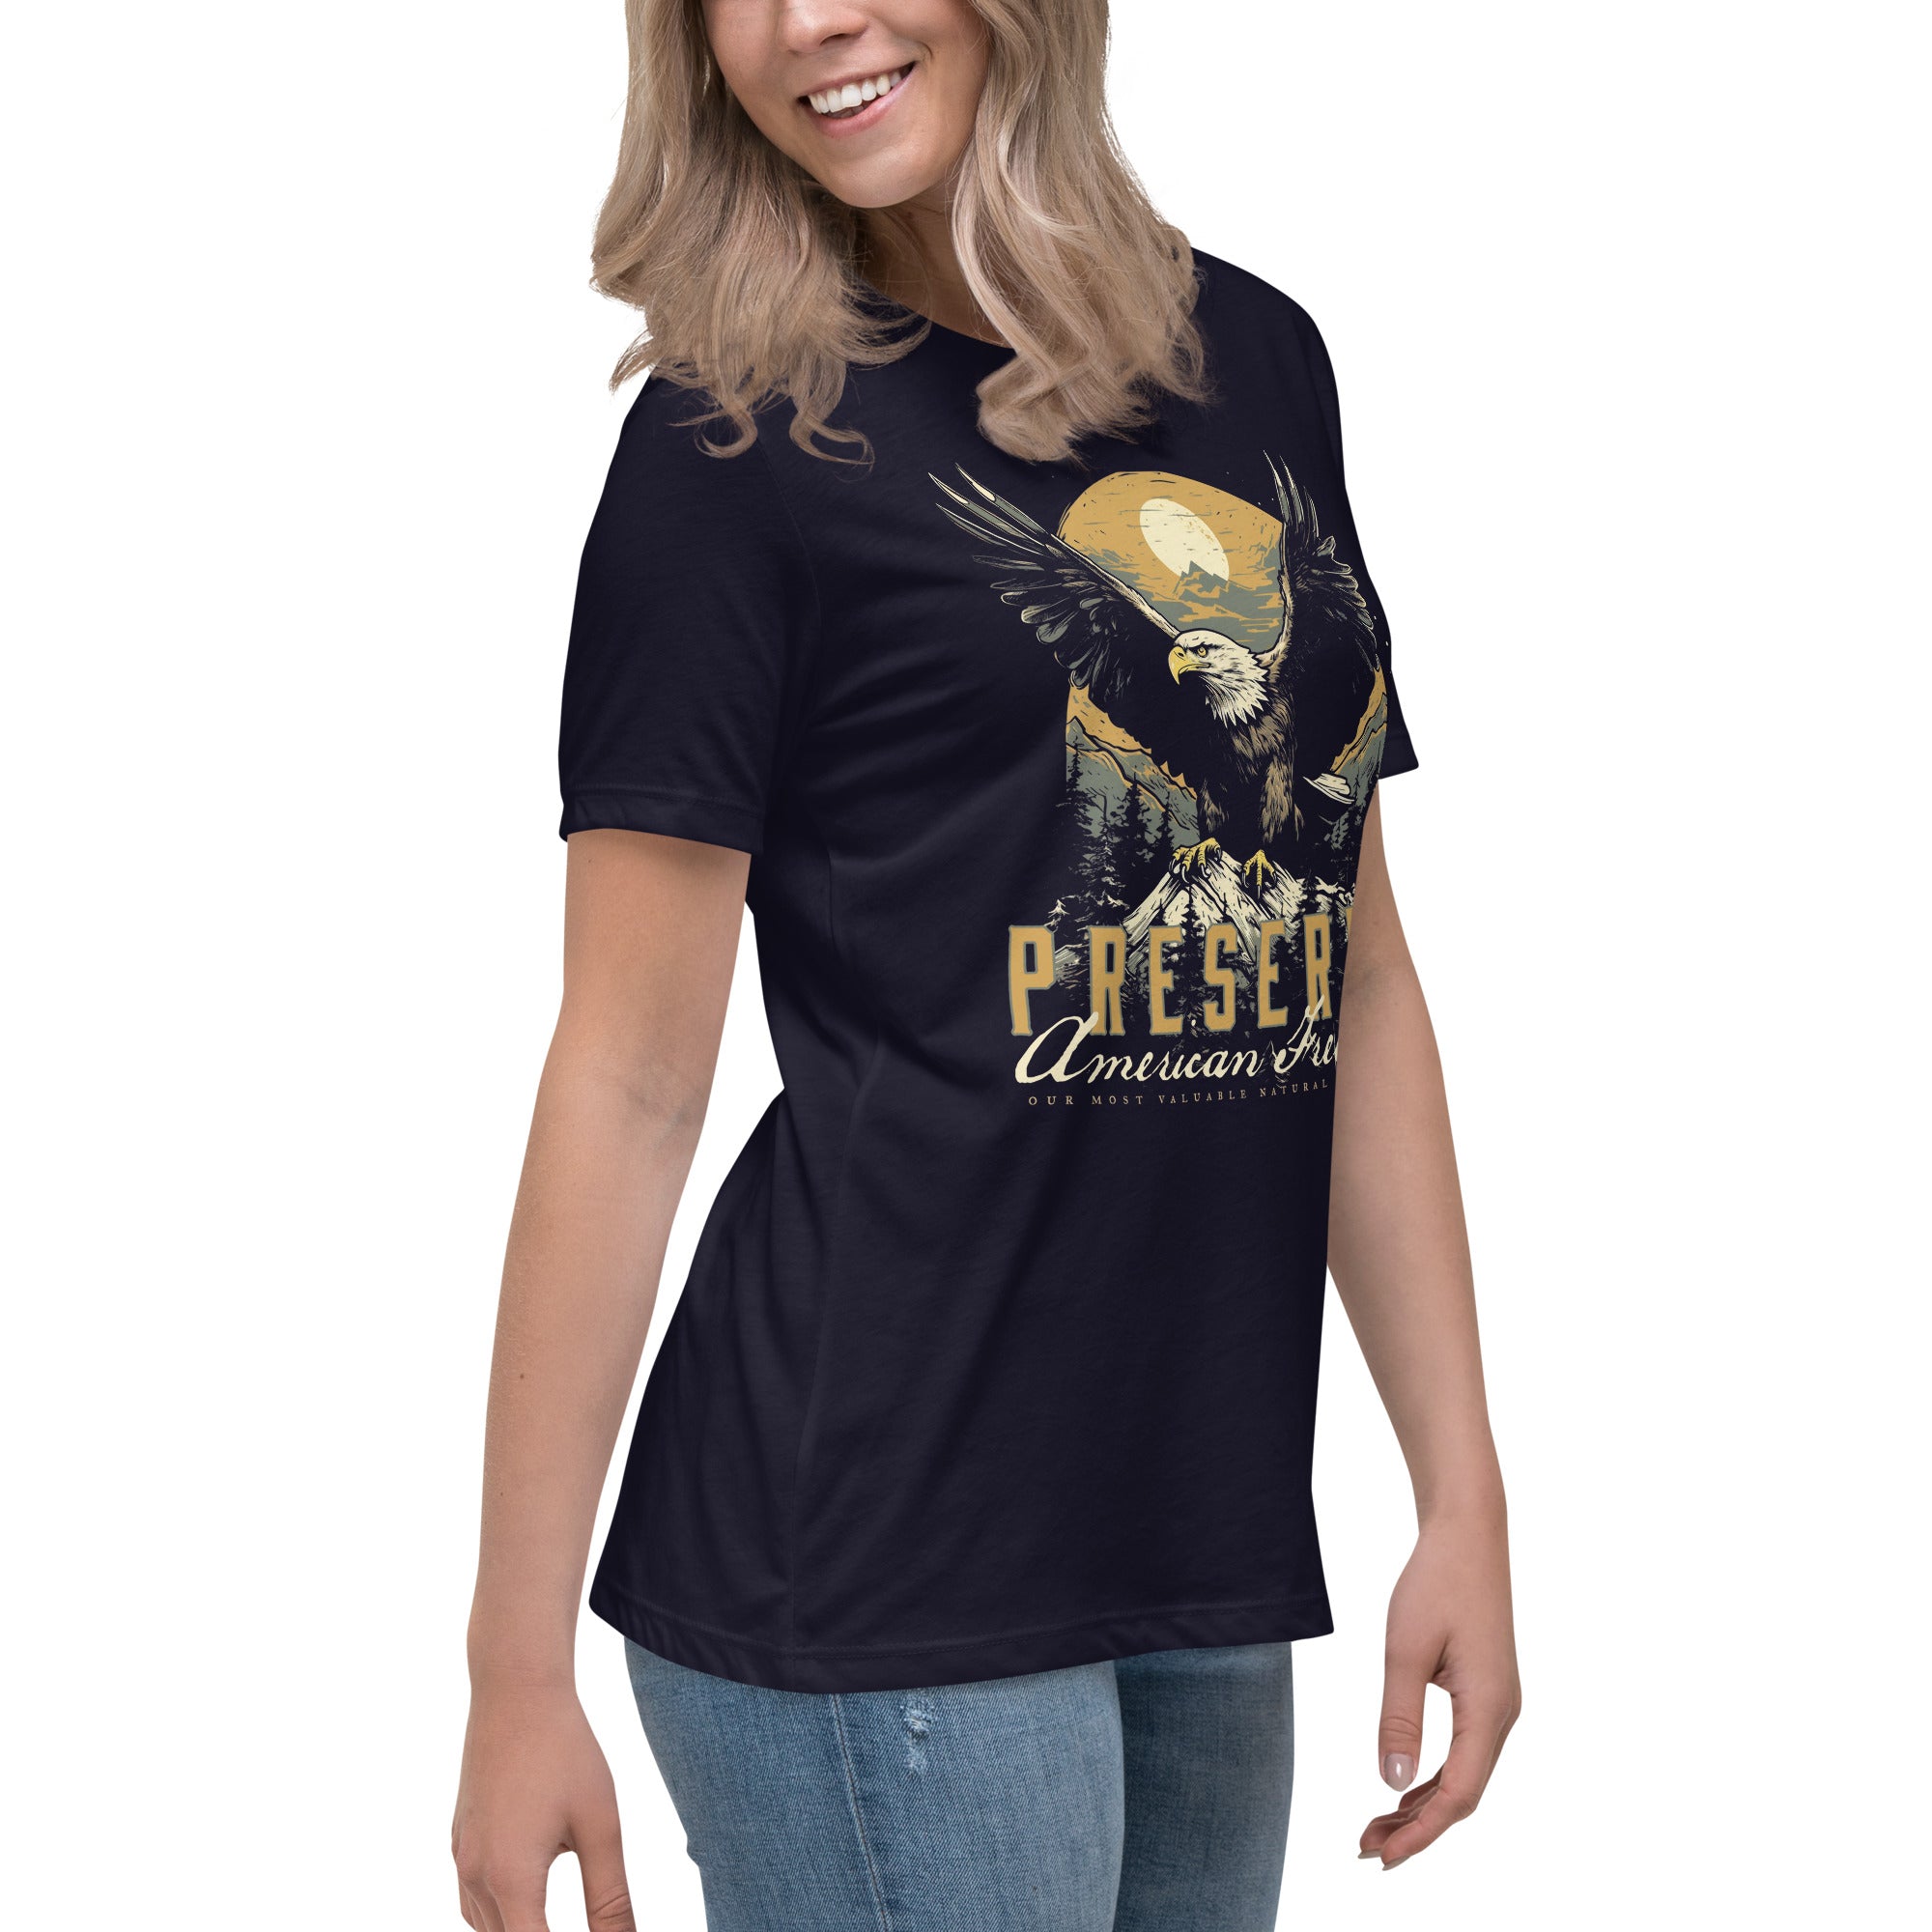 Preserve American Freedom Women's Relaxed Graphic T-Shirt